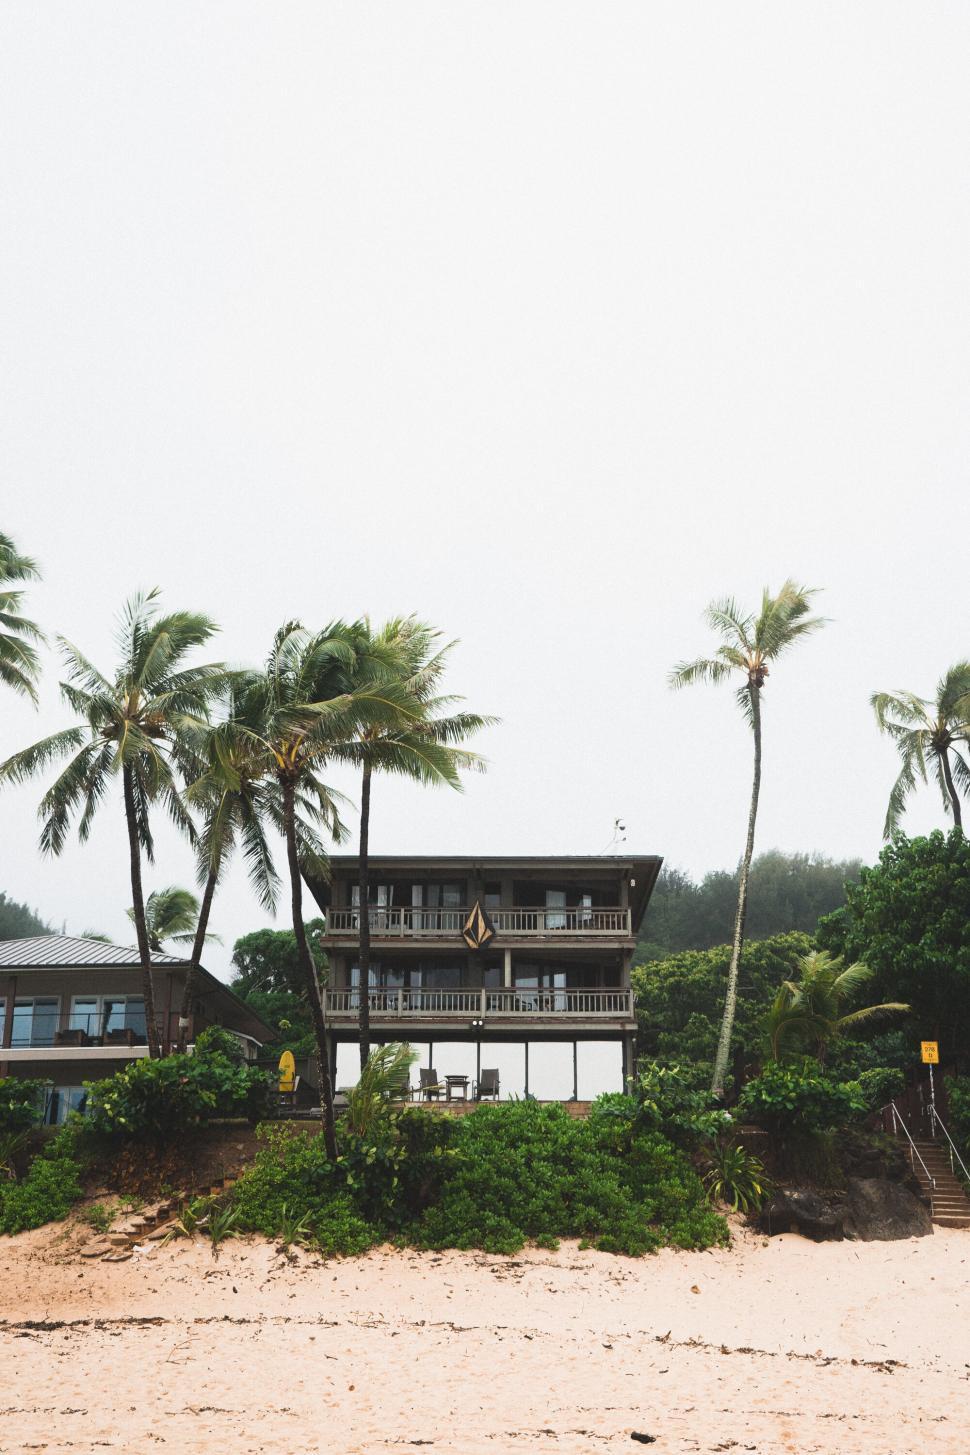 Free Image of Beachfront house amidst palm trees 